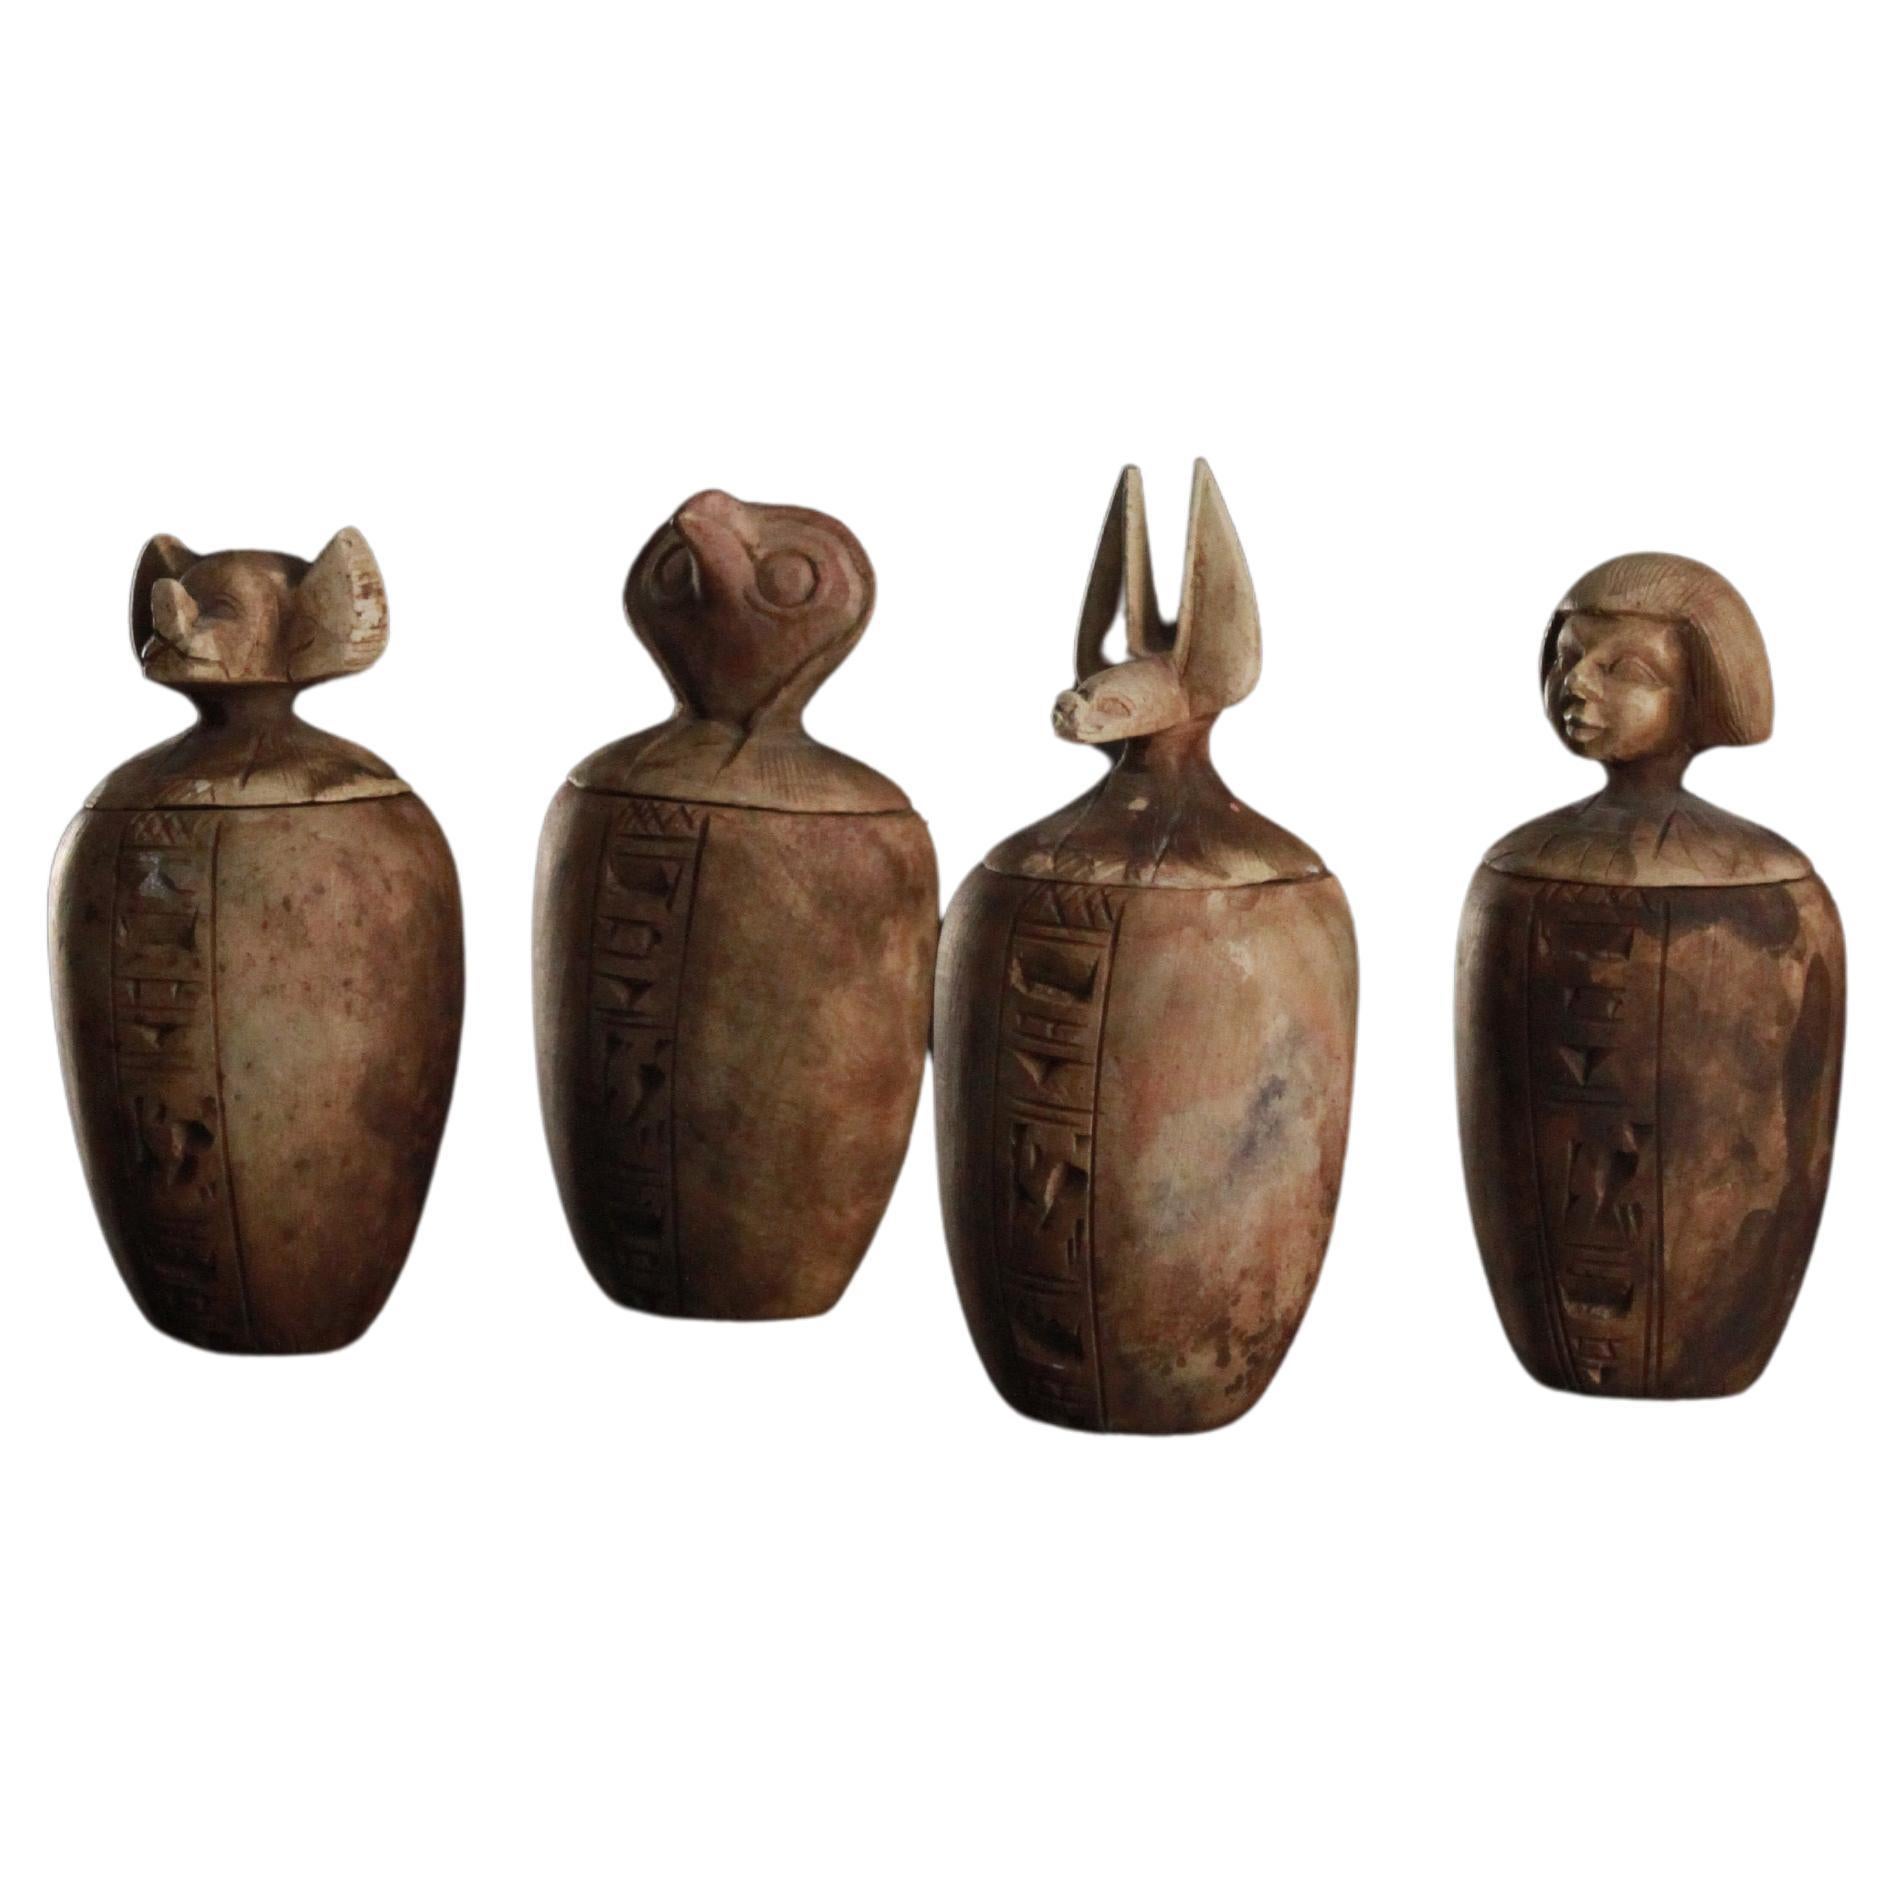 Unique Egyptian Art Set of 4 Canopic Jars Made of Limestone For Sale